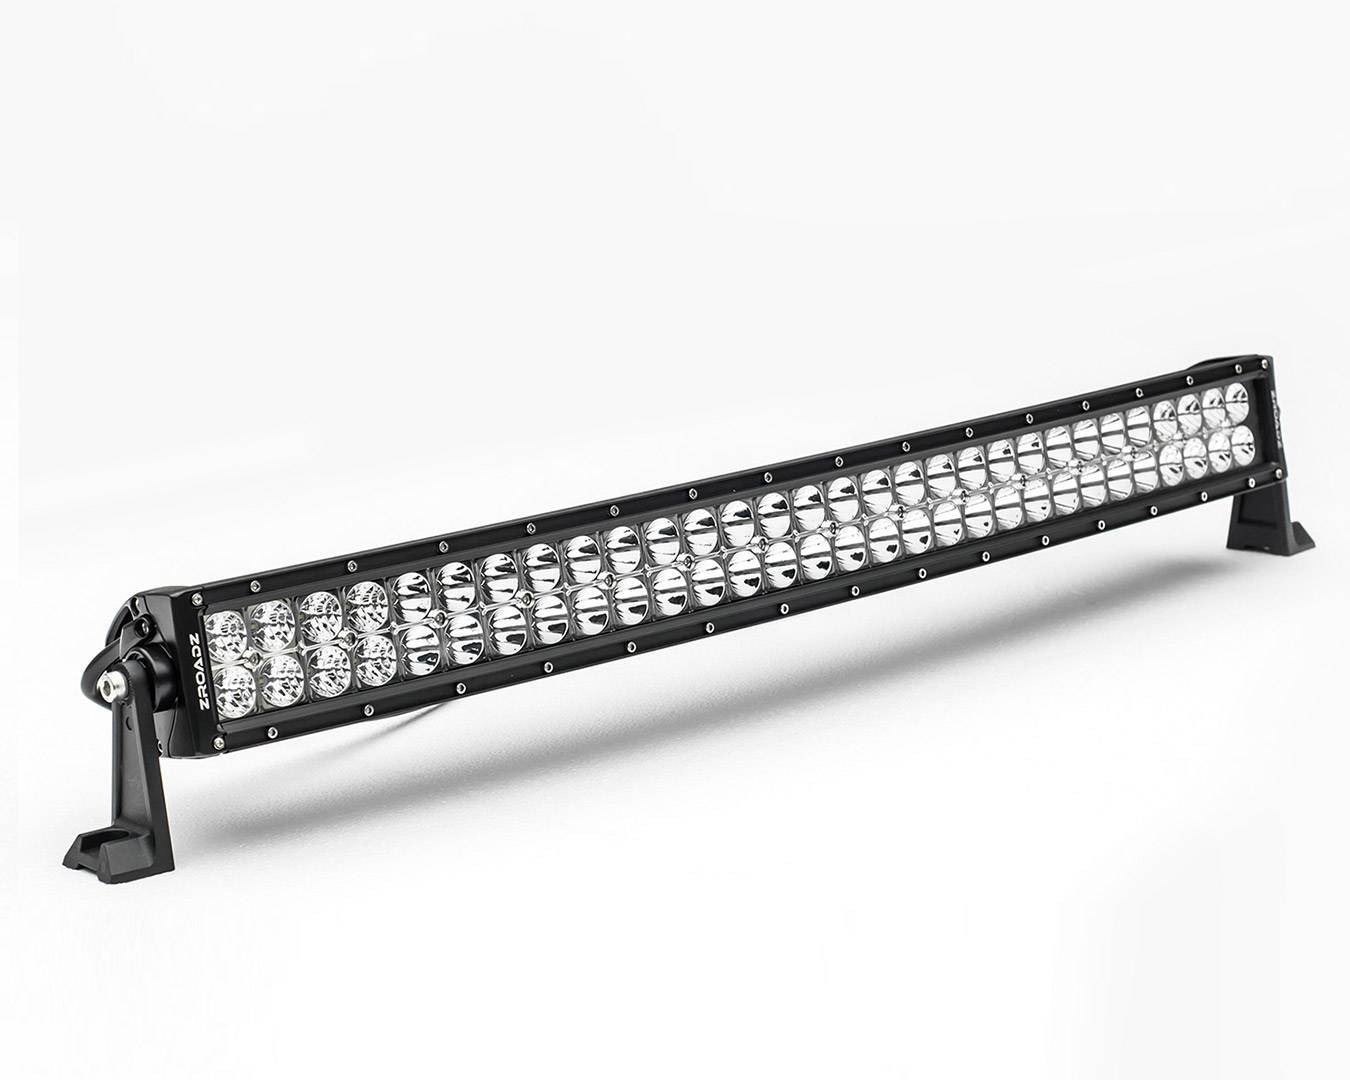 ZROADZ OFF ROAD PRODUCTS - 30 Inch LED Curved Double Row Light Bar - PN #Z30CBC14W180